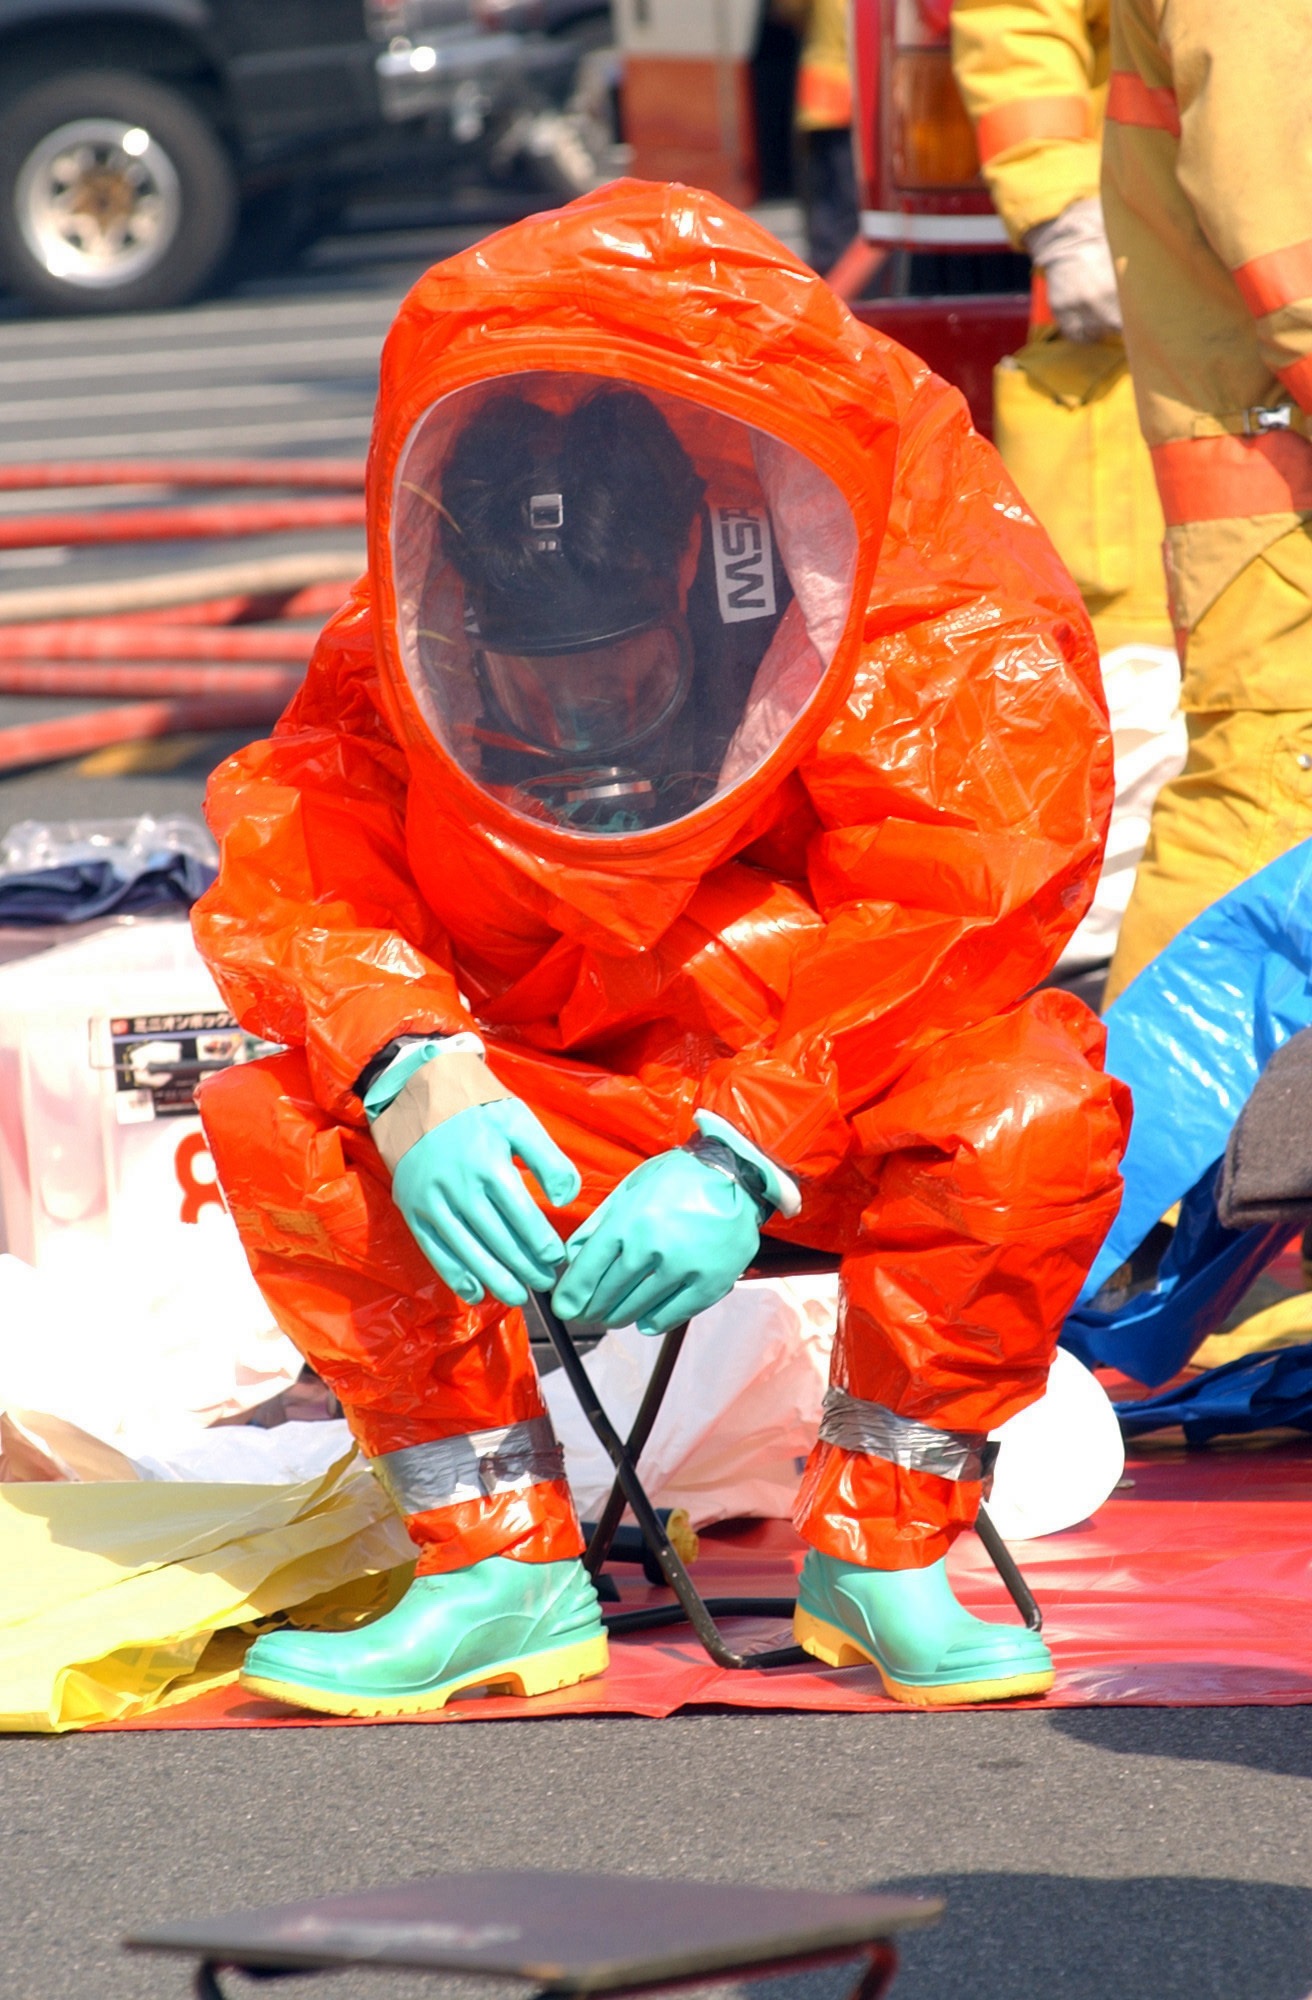 Protection suit photo